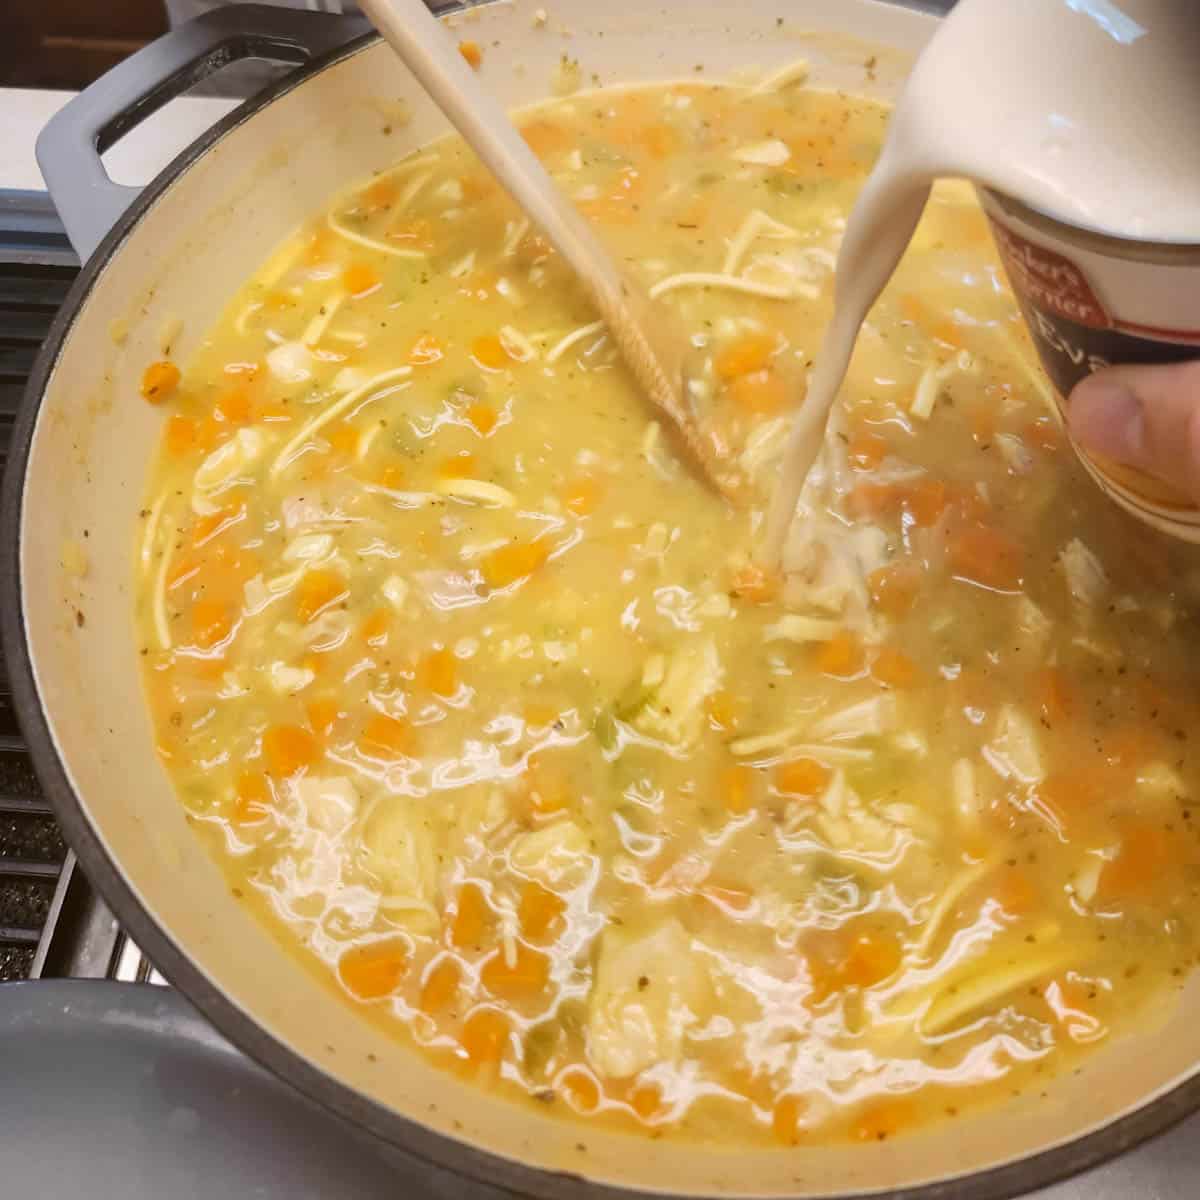 pouring evaporated milk into the creamy chicken noodle soup